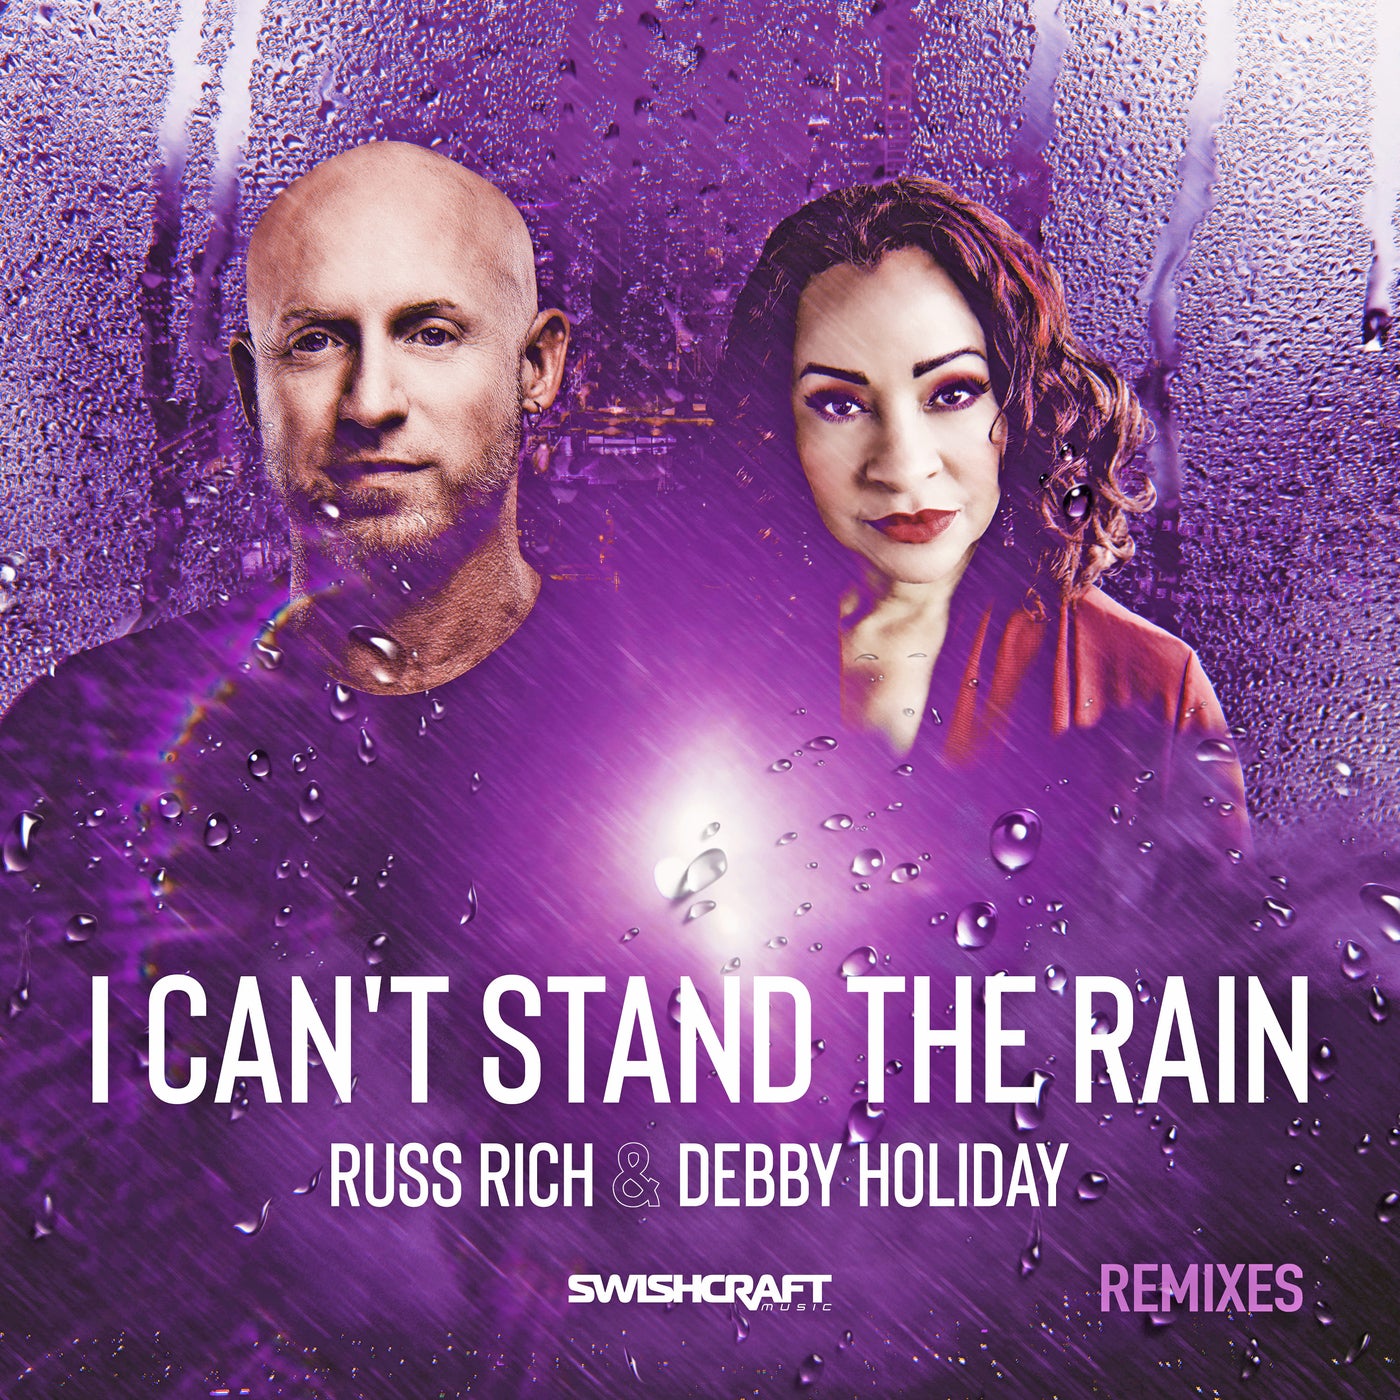 I Can't Stand the Rain (Remixes)